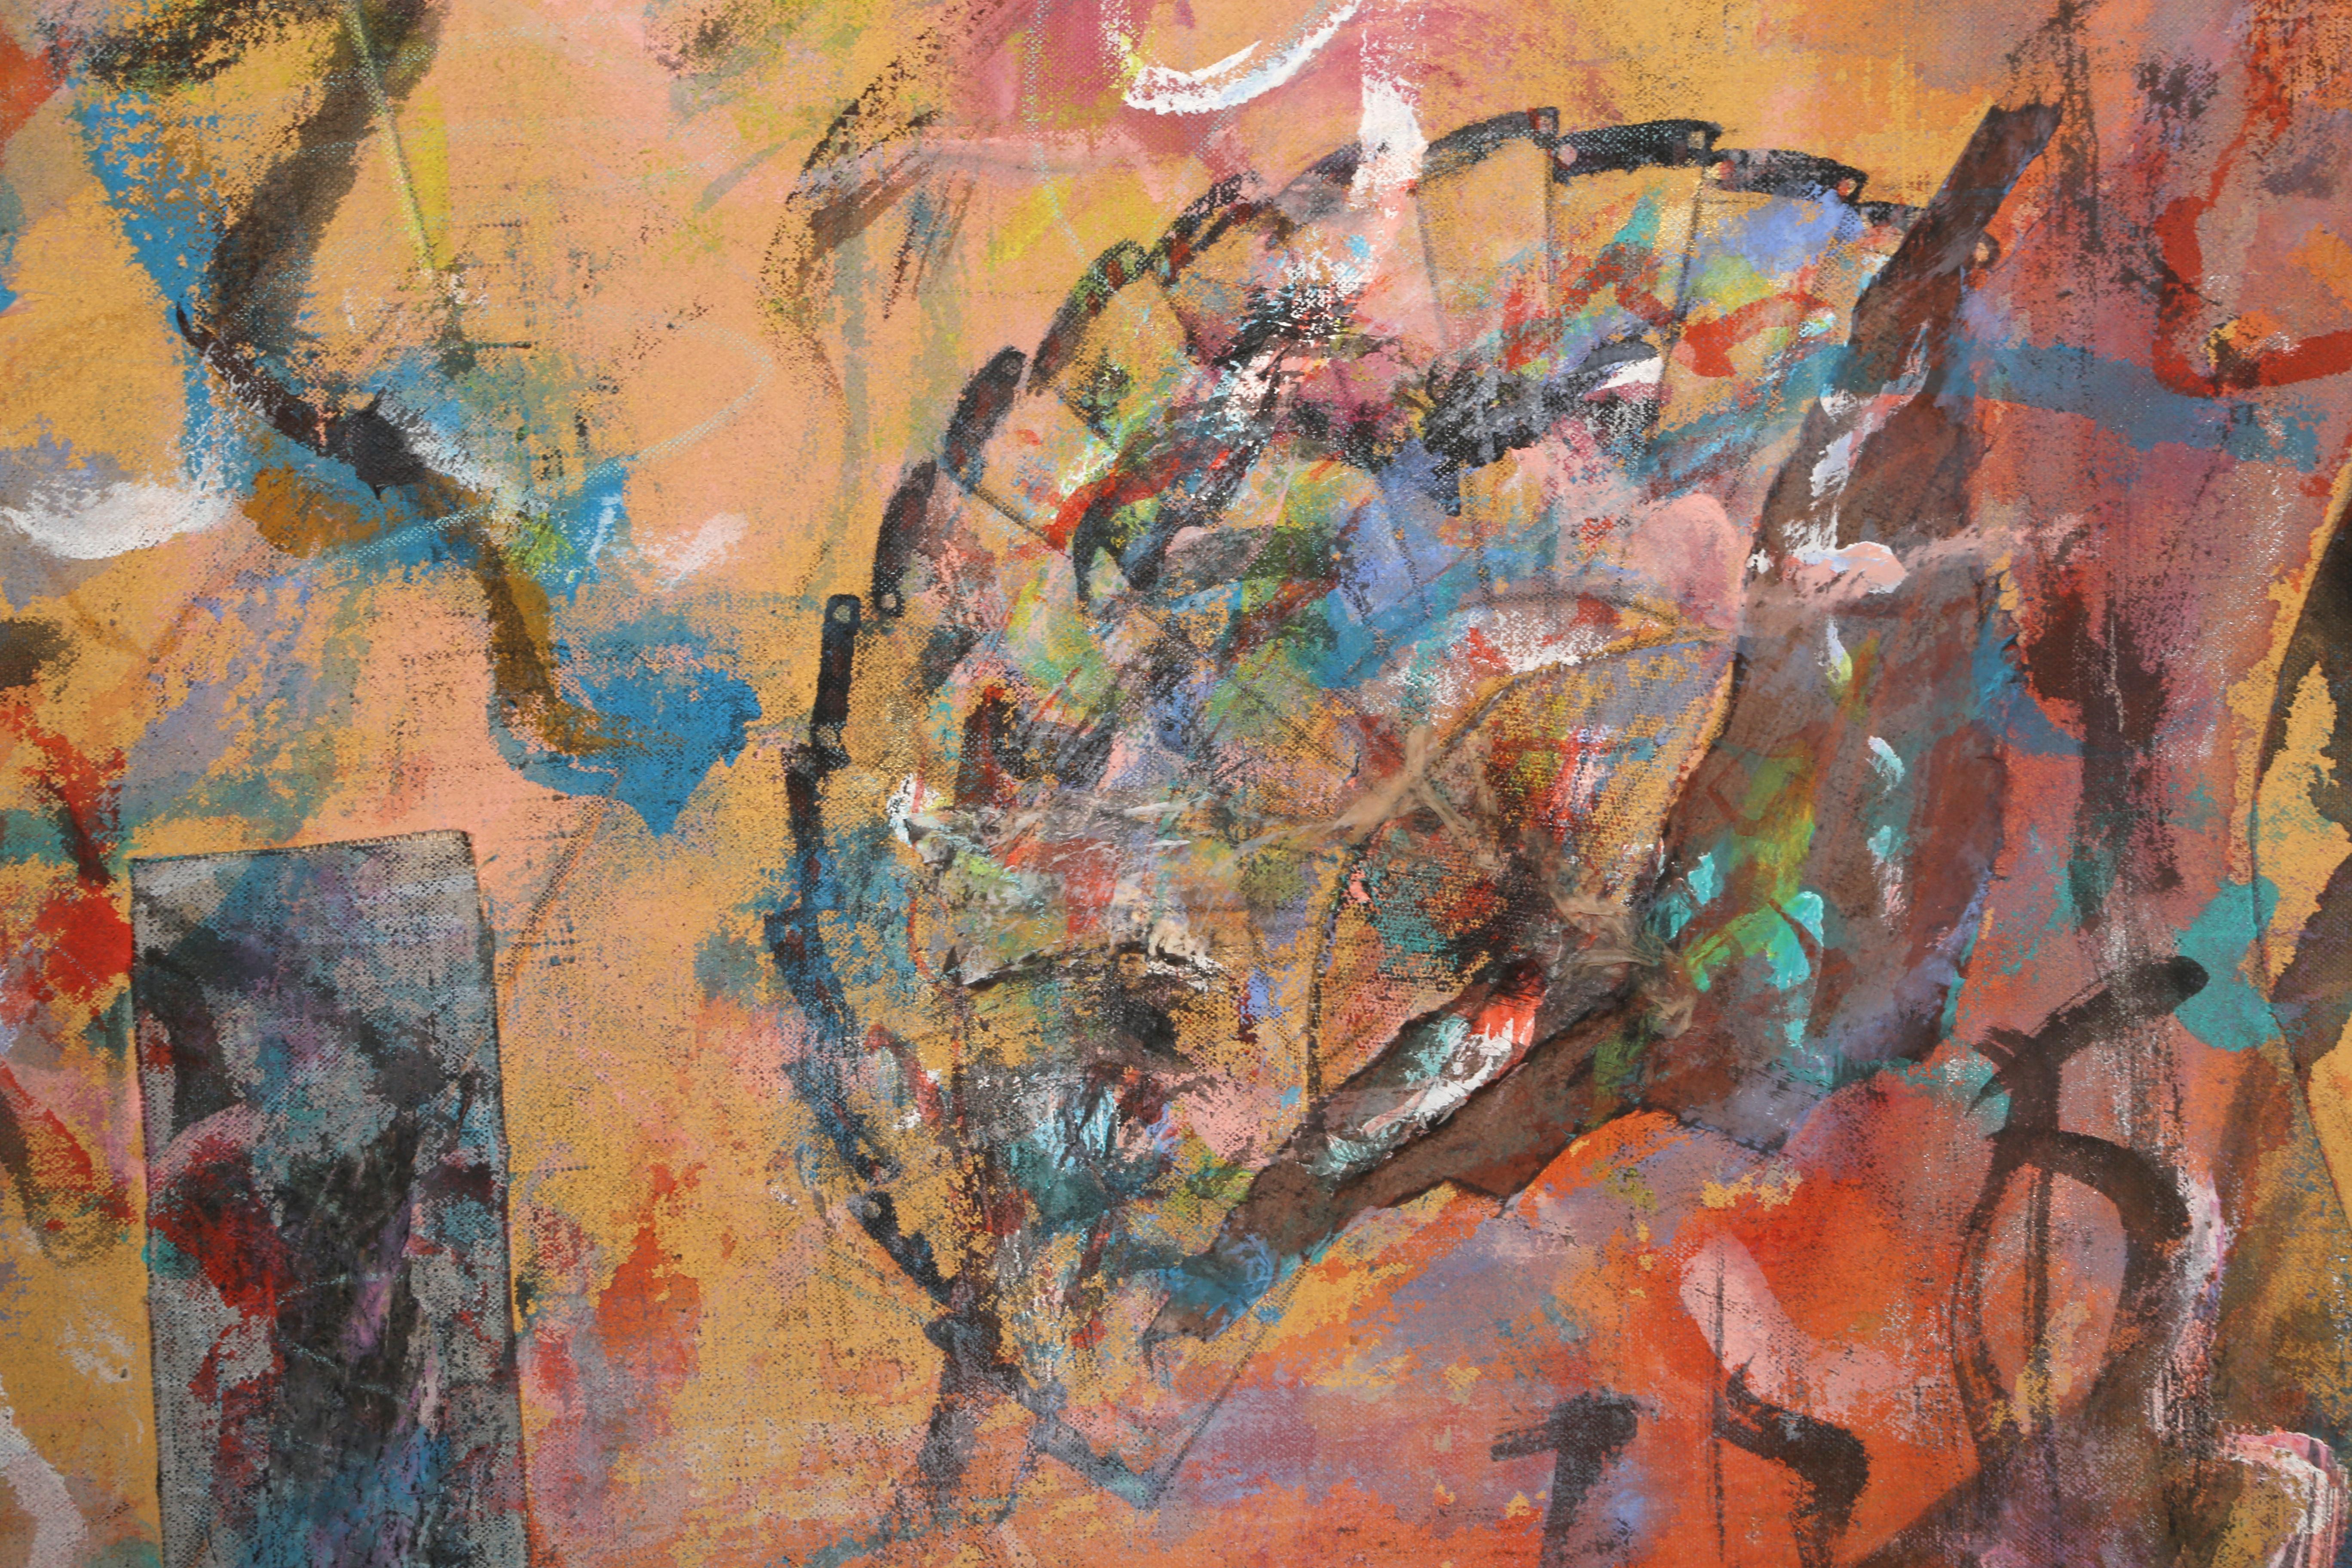 Artist: Kim Hardiman, American XXth
Title: Rhythm & Form
Year: 1984
Medium: Mixed media on canvas, signed, dated, and titled verso
Size: 36 x 42 in. (91.44 x 106.68 cm)